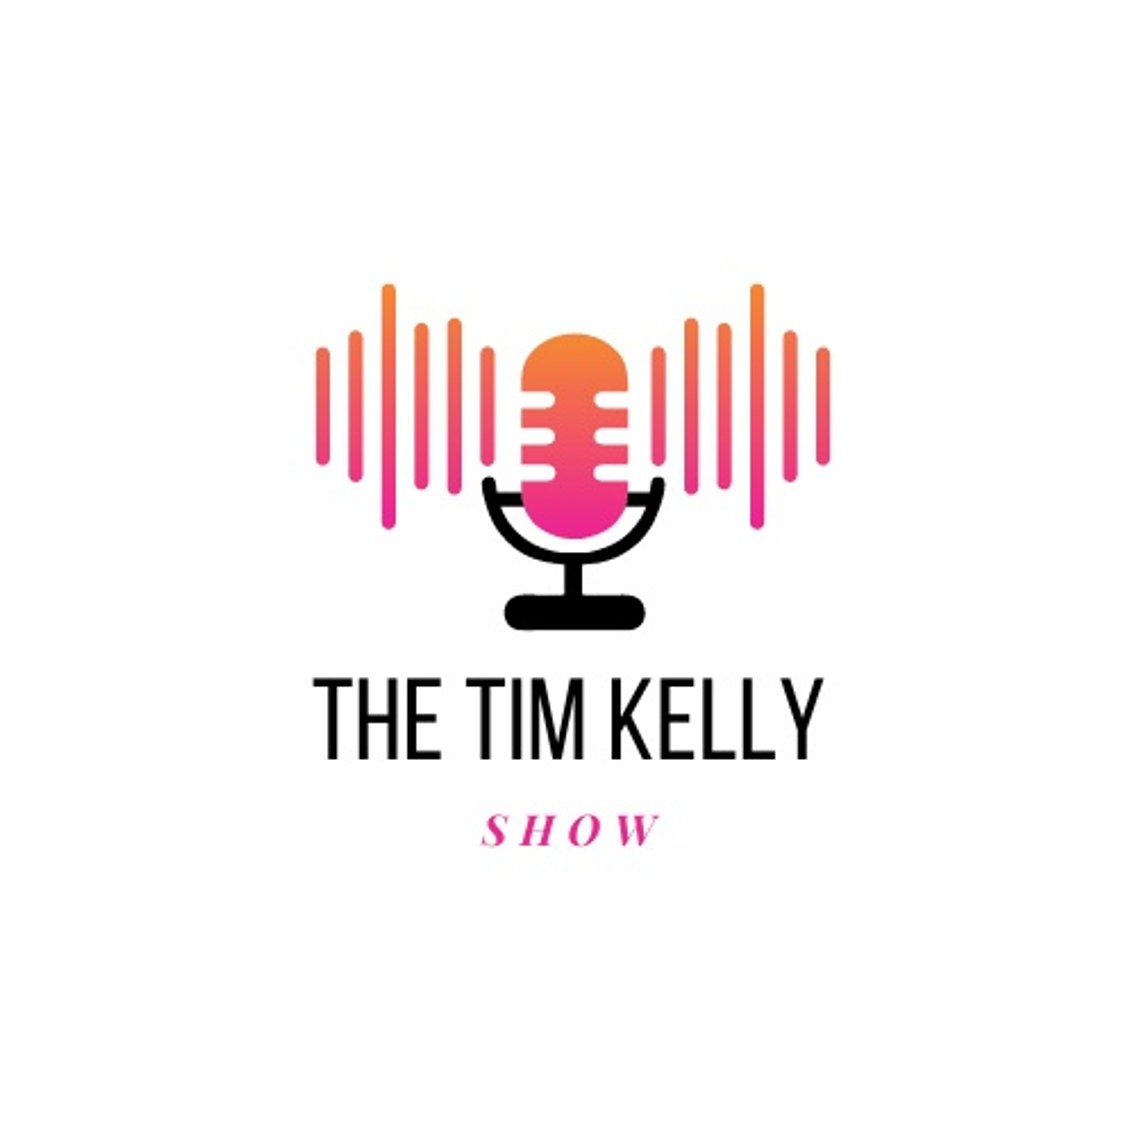 The Tim Kelly Show - Cover Image